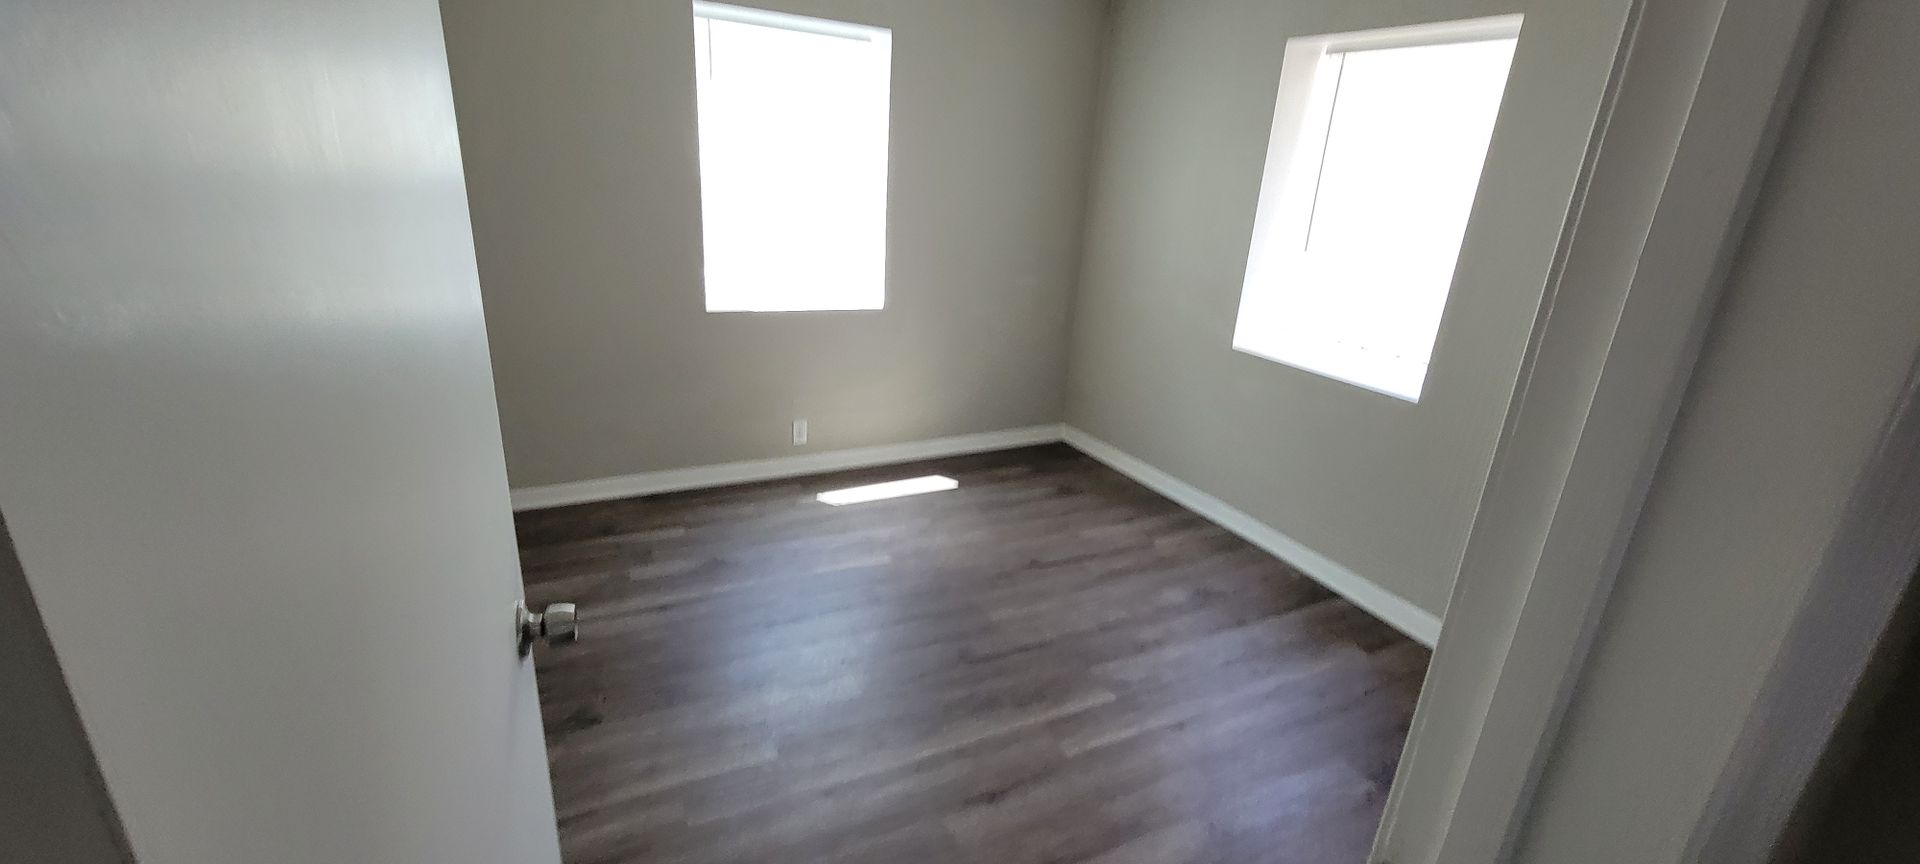 Updated Ranch 2 bedroom with extra room